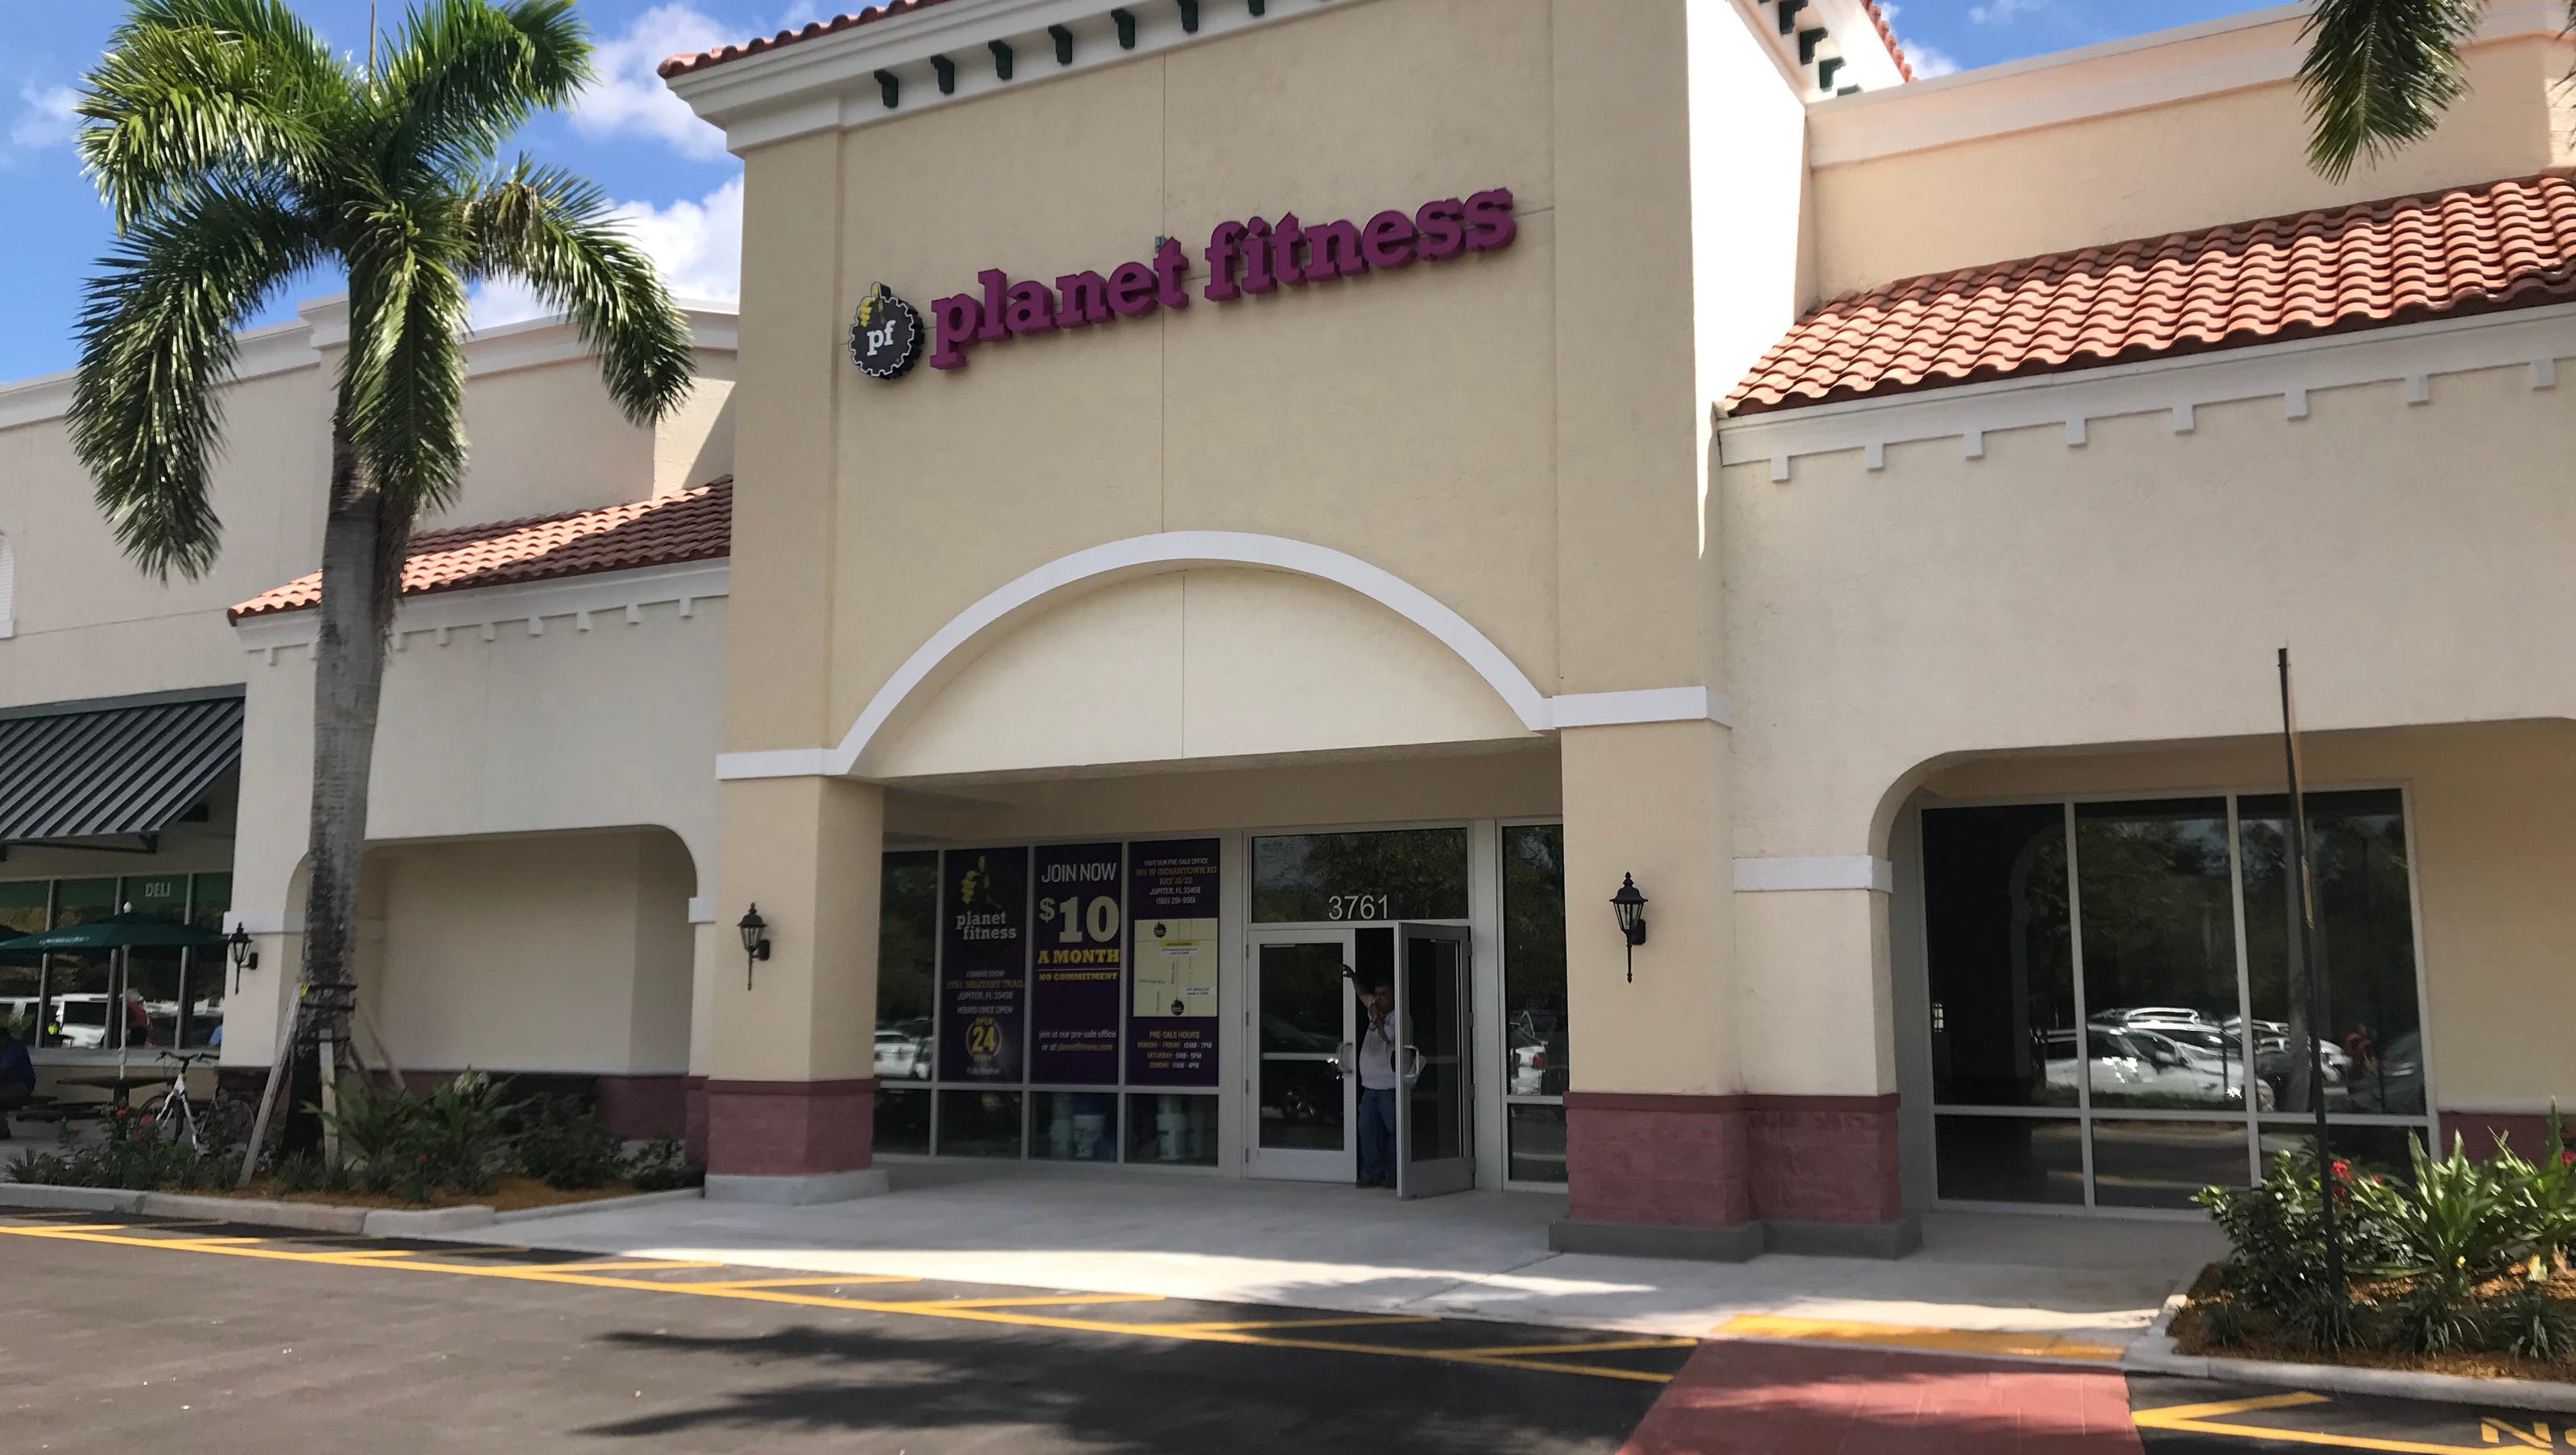 NEW: Planet Fitness expects to open in Jupiter next month